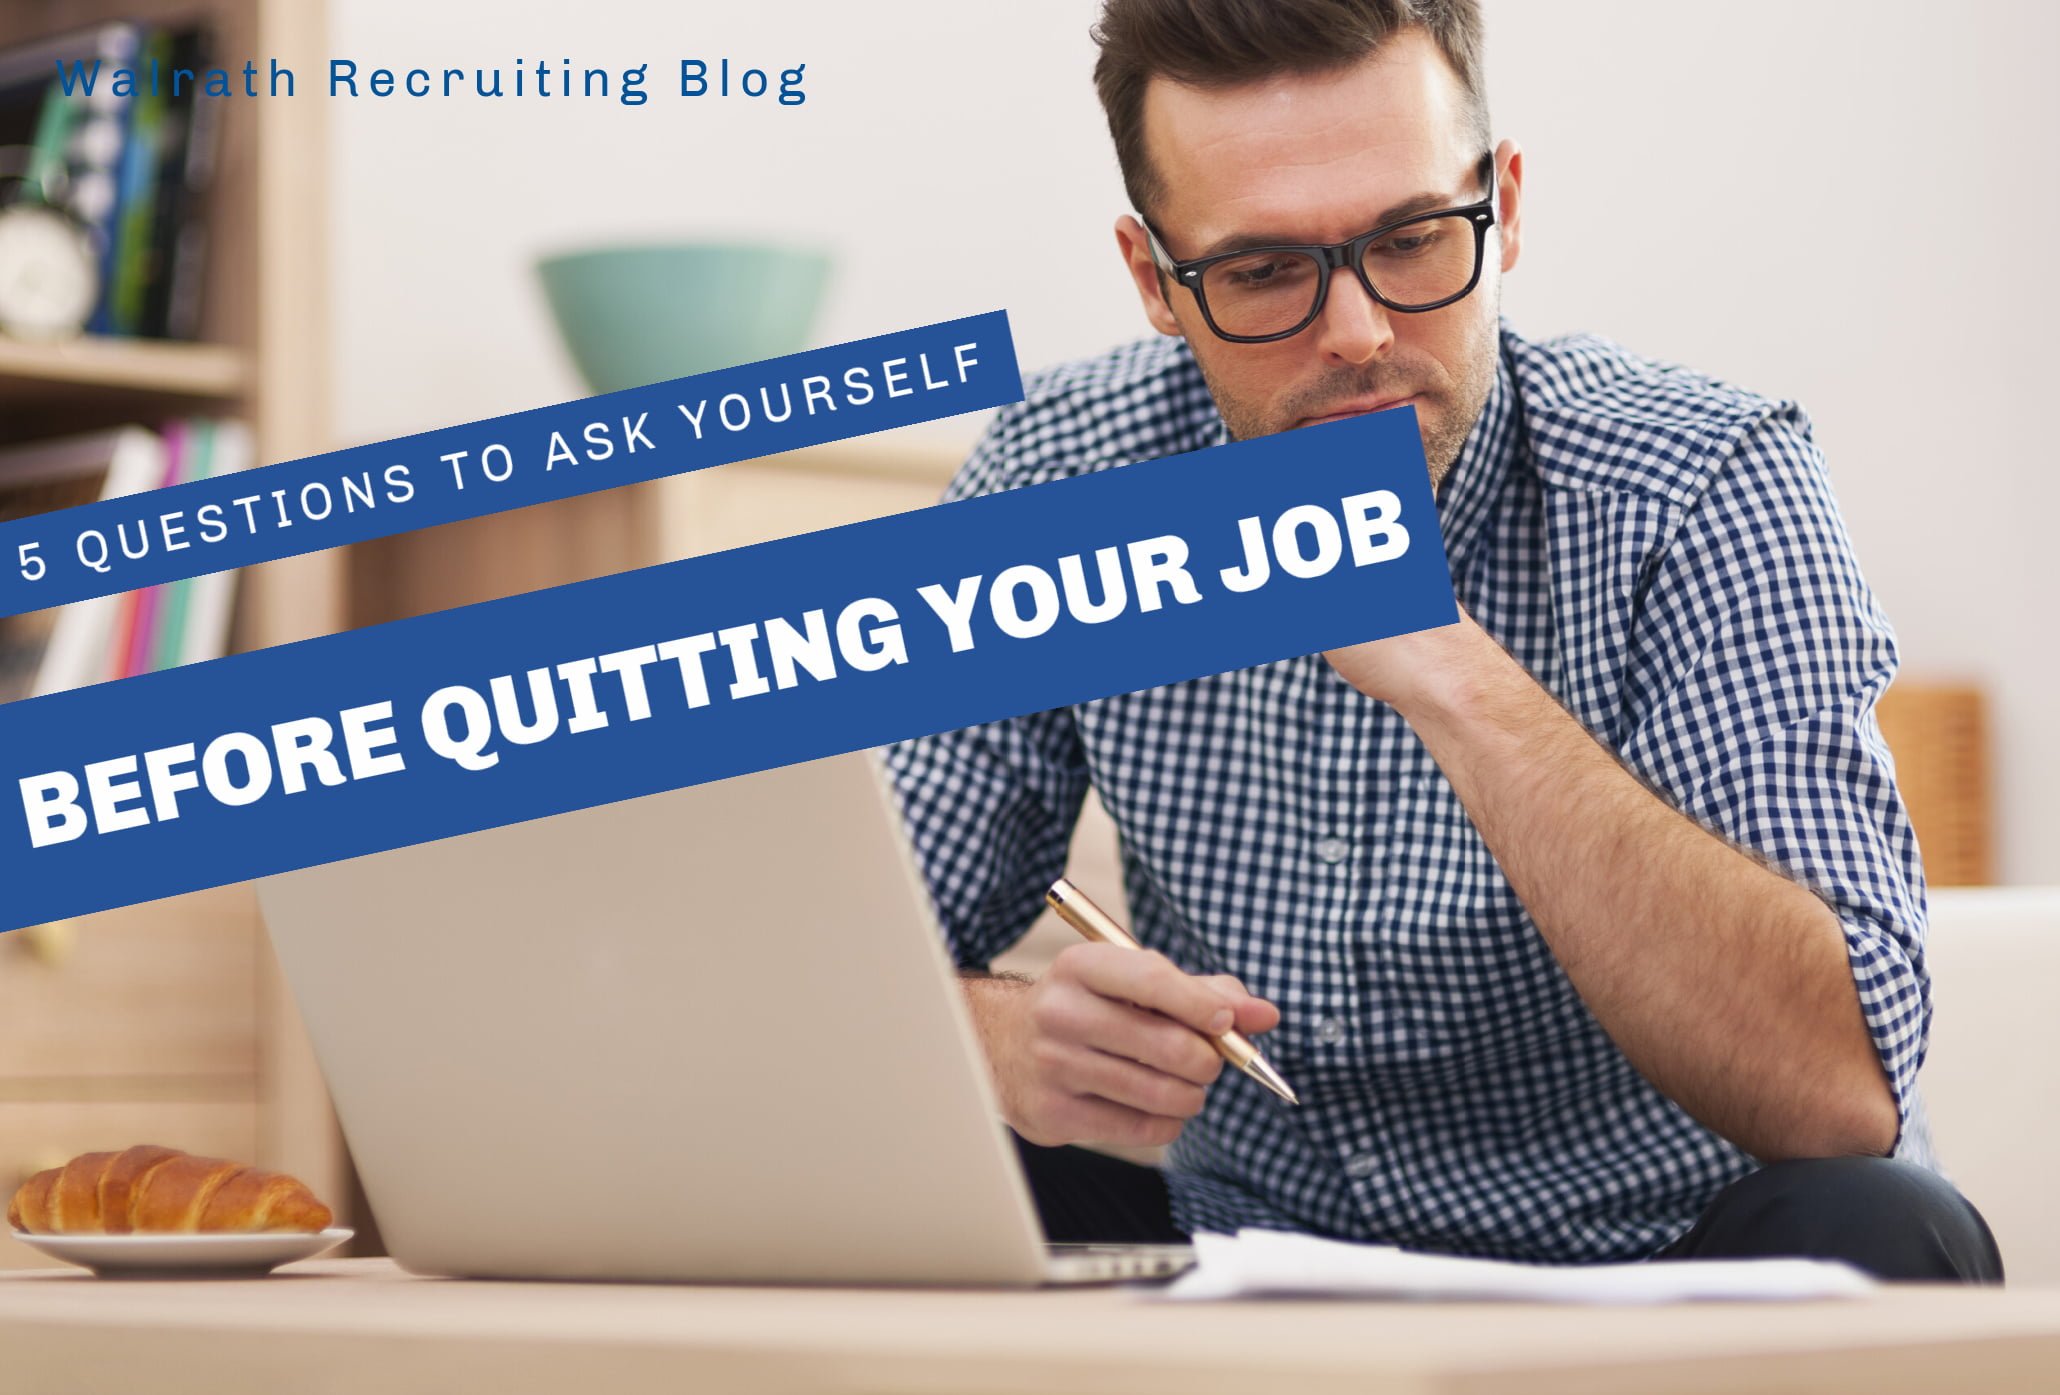 Quitting a job is a big deal. Be sure you're making the rightchoice by asking yourself these questions.